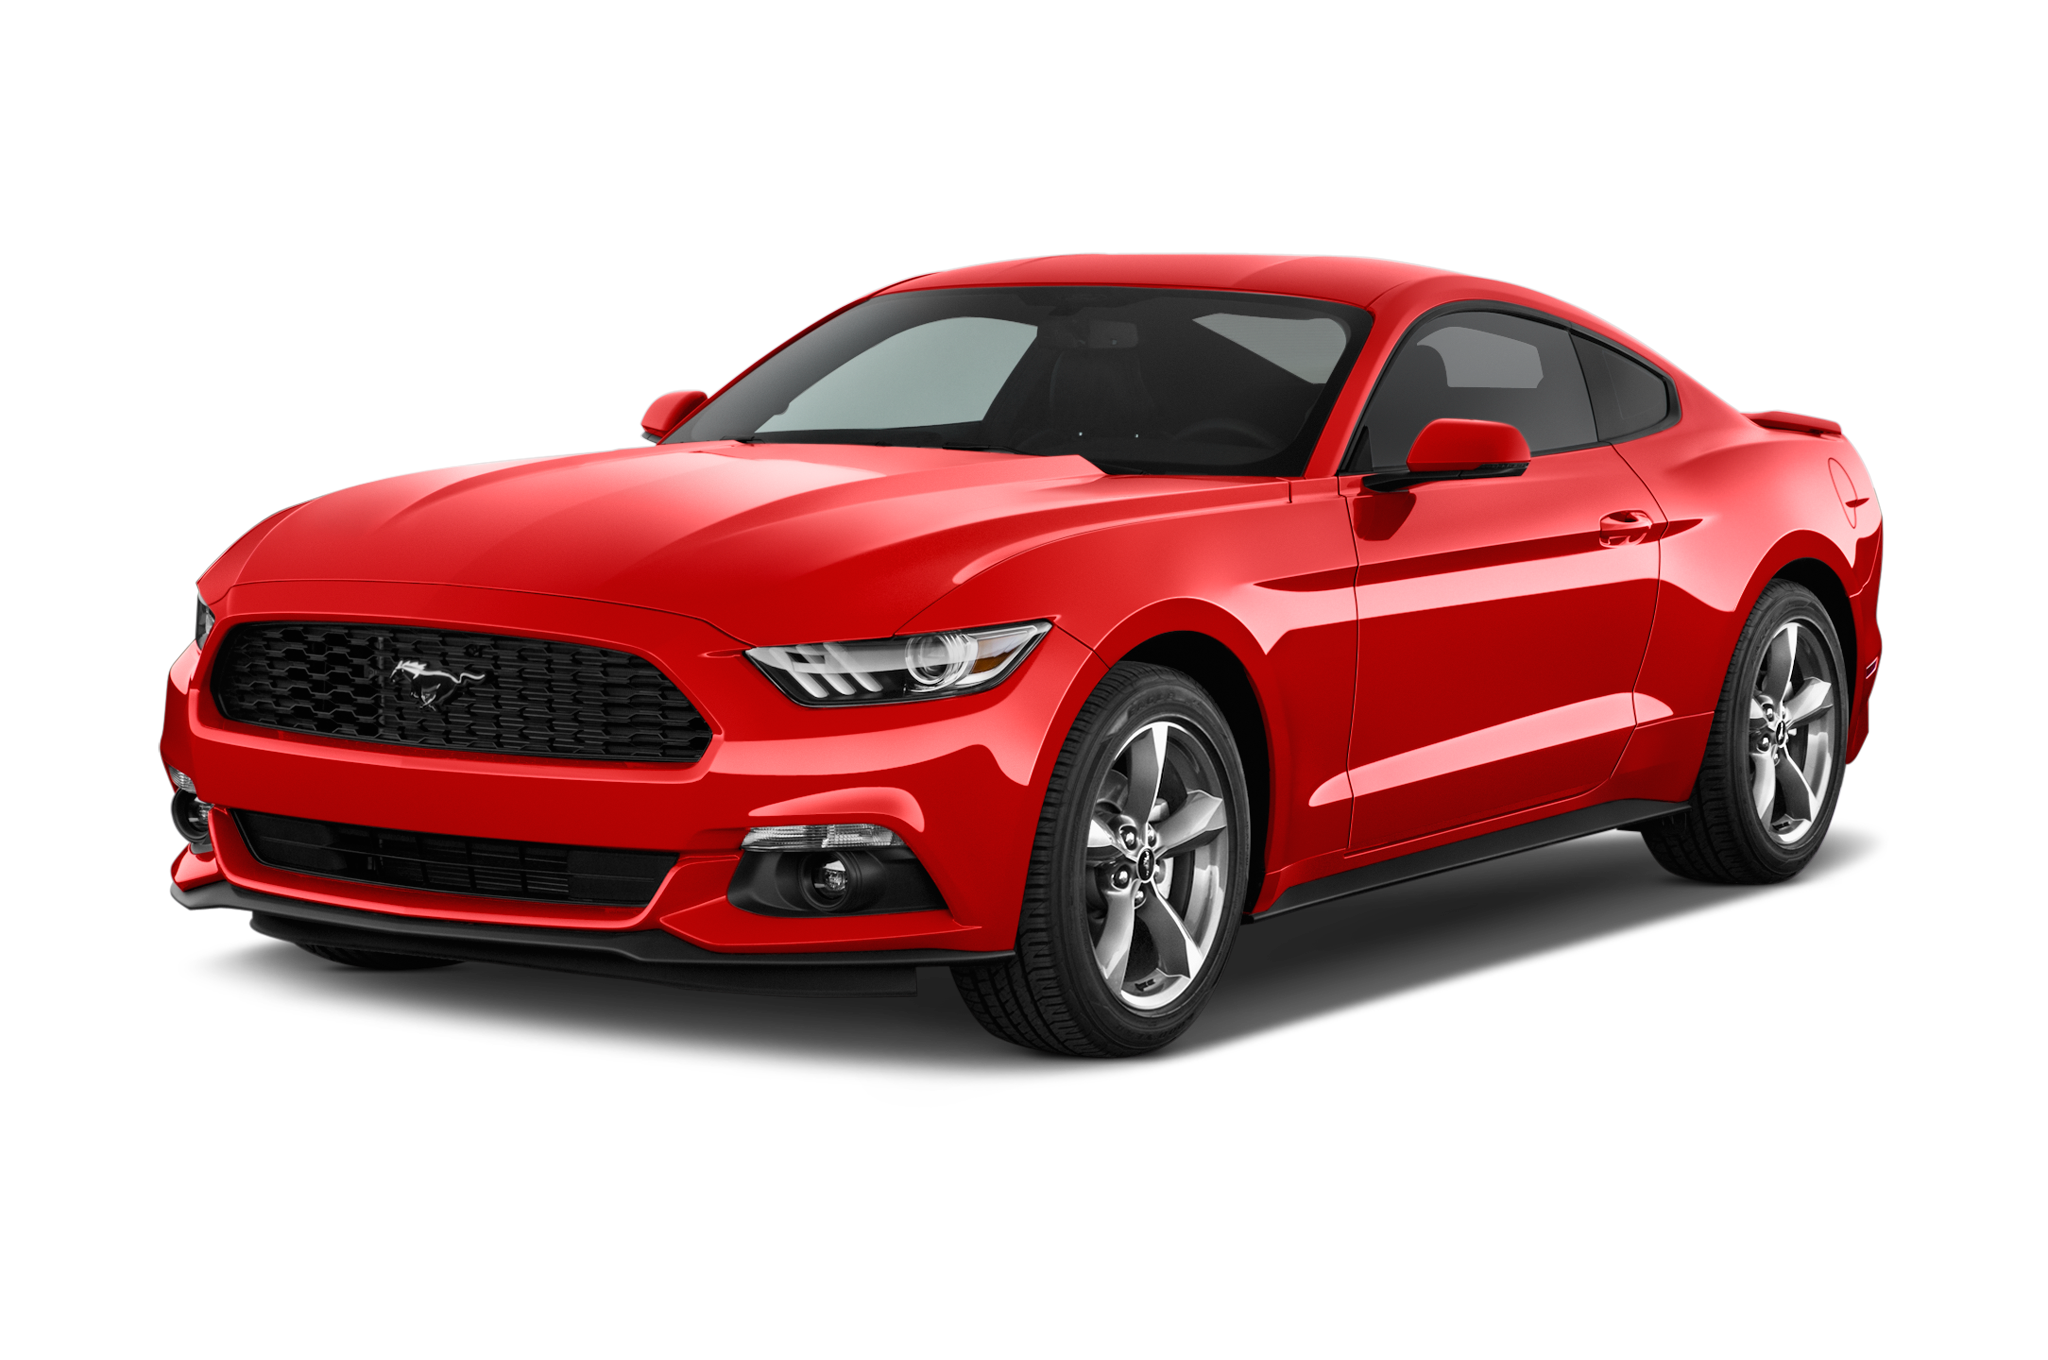 Ford Mustang Backgrounds, Compatible - PC, Mobile, Gadgets| 2048x1360 px